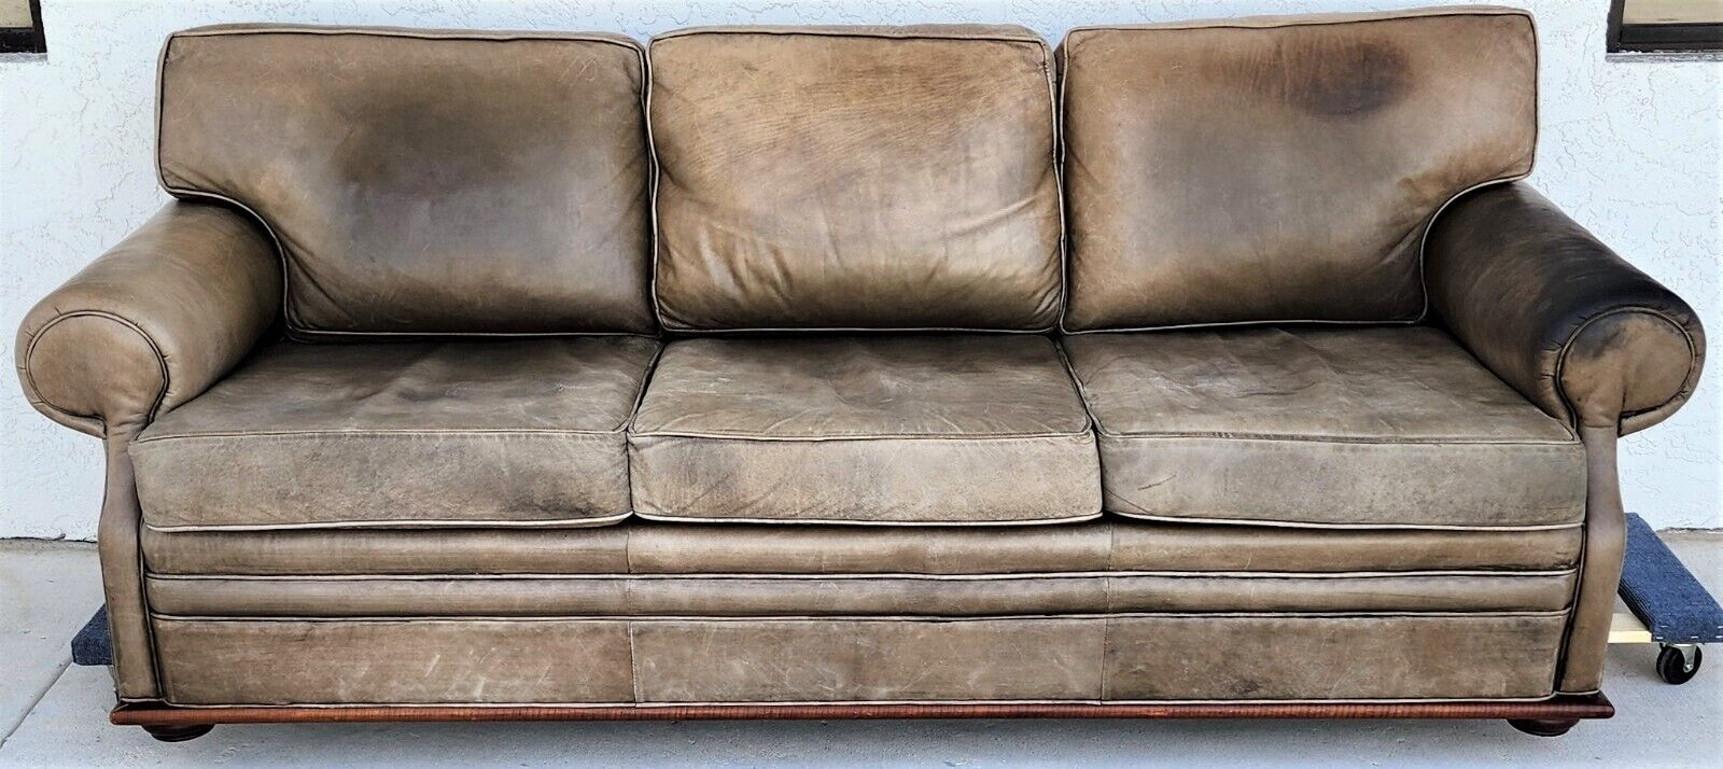 For FULL item description click on CONTINUE READING at the bottom of this page.

Offering One Of Our Recent Palm Beach Estate Fine Furniture Acquisitions Of A
Vintage 1970s Classic Saddle Leather Sofa by RALPH LAUREN

Approximate Measurements